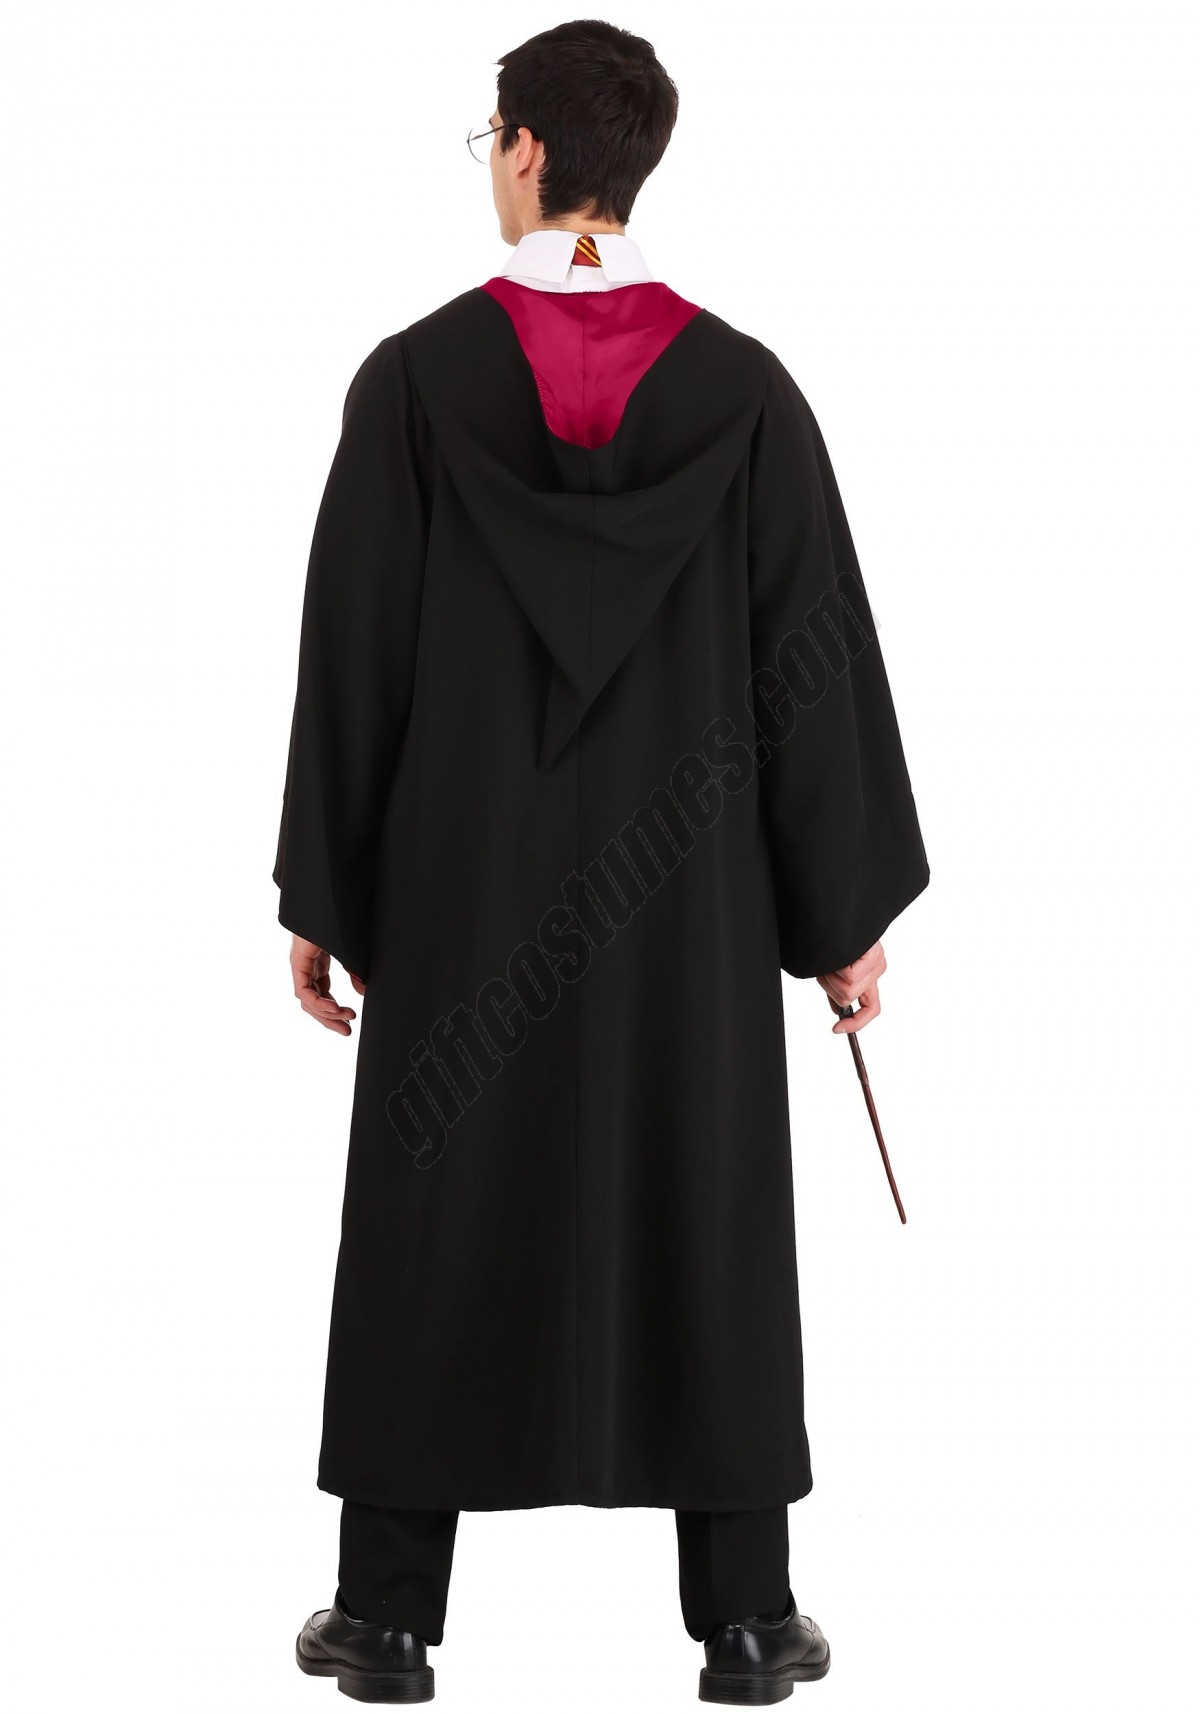 Deluxe Harry Potter Costume for Adults Promotions - -1